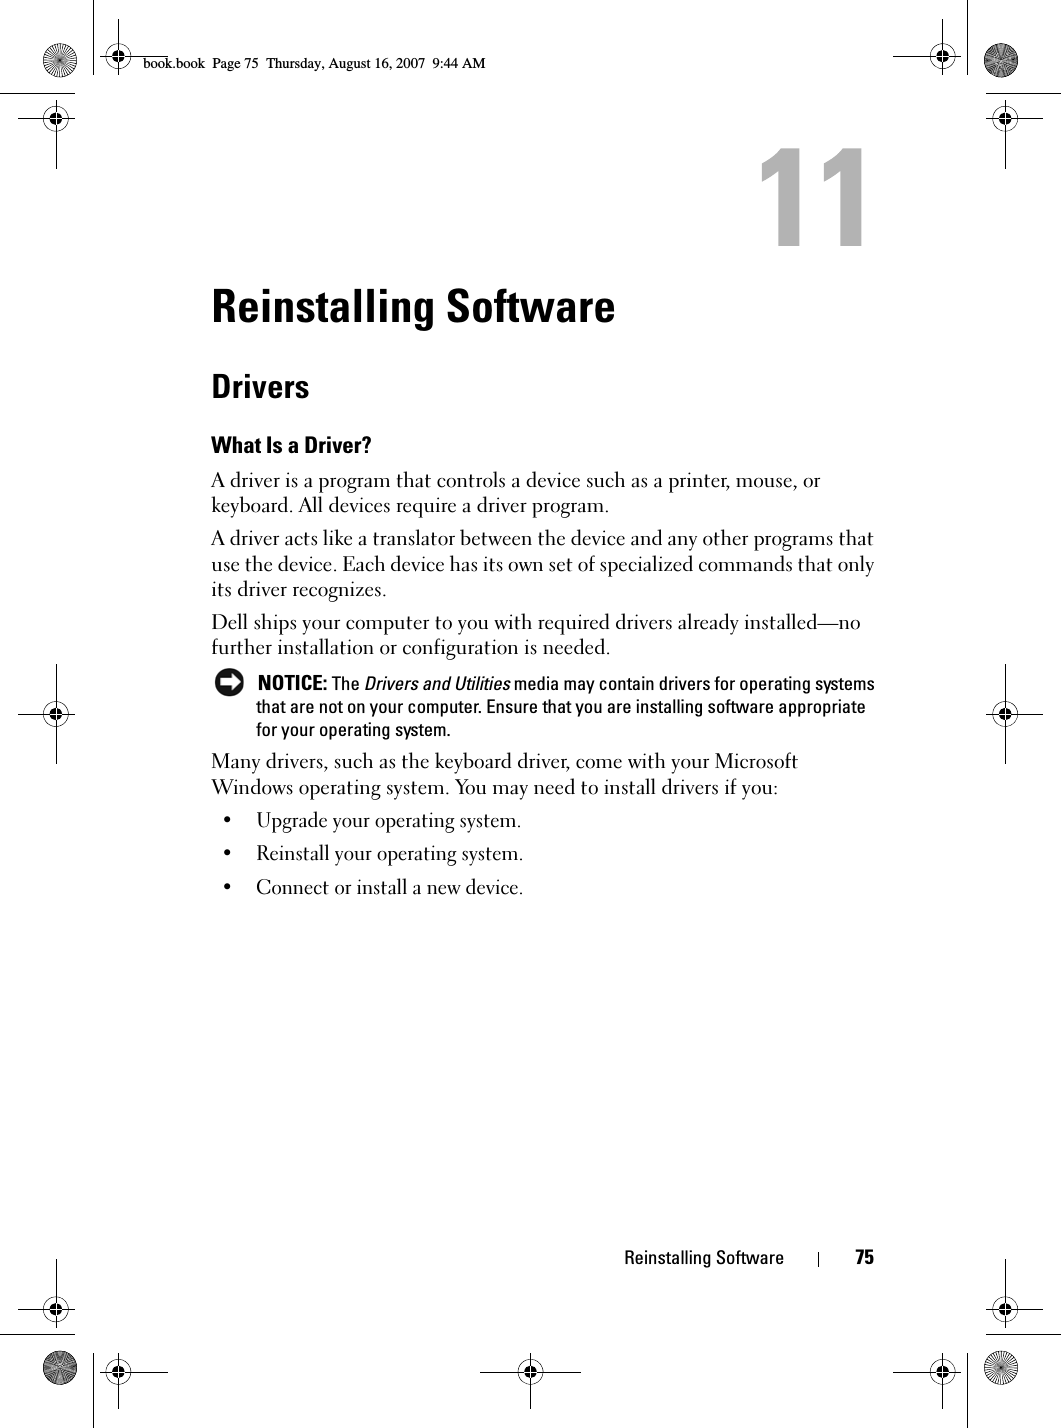 Reinstalling Software 75Reinstalling SoftwareDriversWhat Is a Driver?A driver is a program that controls a device such as a printer, mouse, or keyboard. All devices require a driver program.A driver acts like a translator between the device and any other programs that use the device. Each device has its own set of specialized commands that only its driver recognizes.Dell ships your computer to you with required drivers already installed—no further installation or configuration is needed. NOTICE: The Drivers and Utilities media may contain drivers for operating systems that are not on your computer. Ensure that you are installing software appropriate for your operating system.Many drivers, such as the keyboard driver, come with your Microsoft Windows operating system. You may need to install drivers if you:• Upgrade your operating system.• Reinstall your operating system.• Connect or install a new device.book.book  Page 75  Thursday, August 16, 2007  9:44 AM